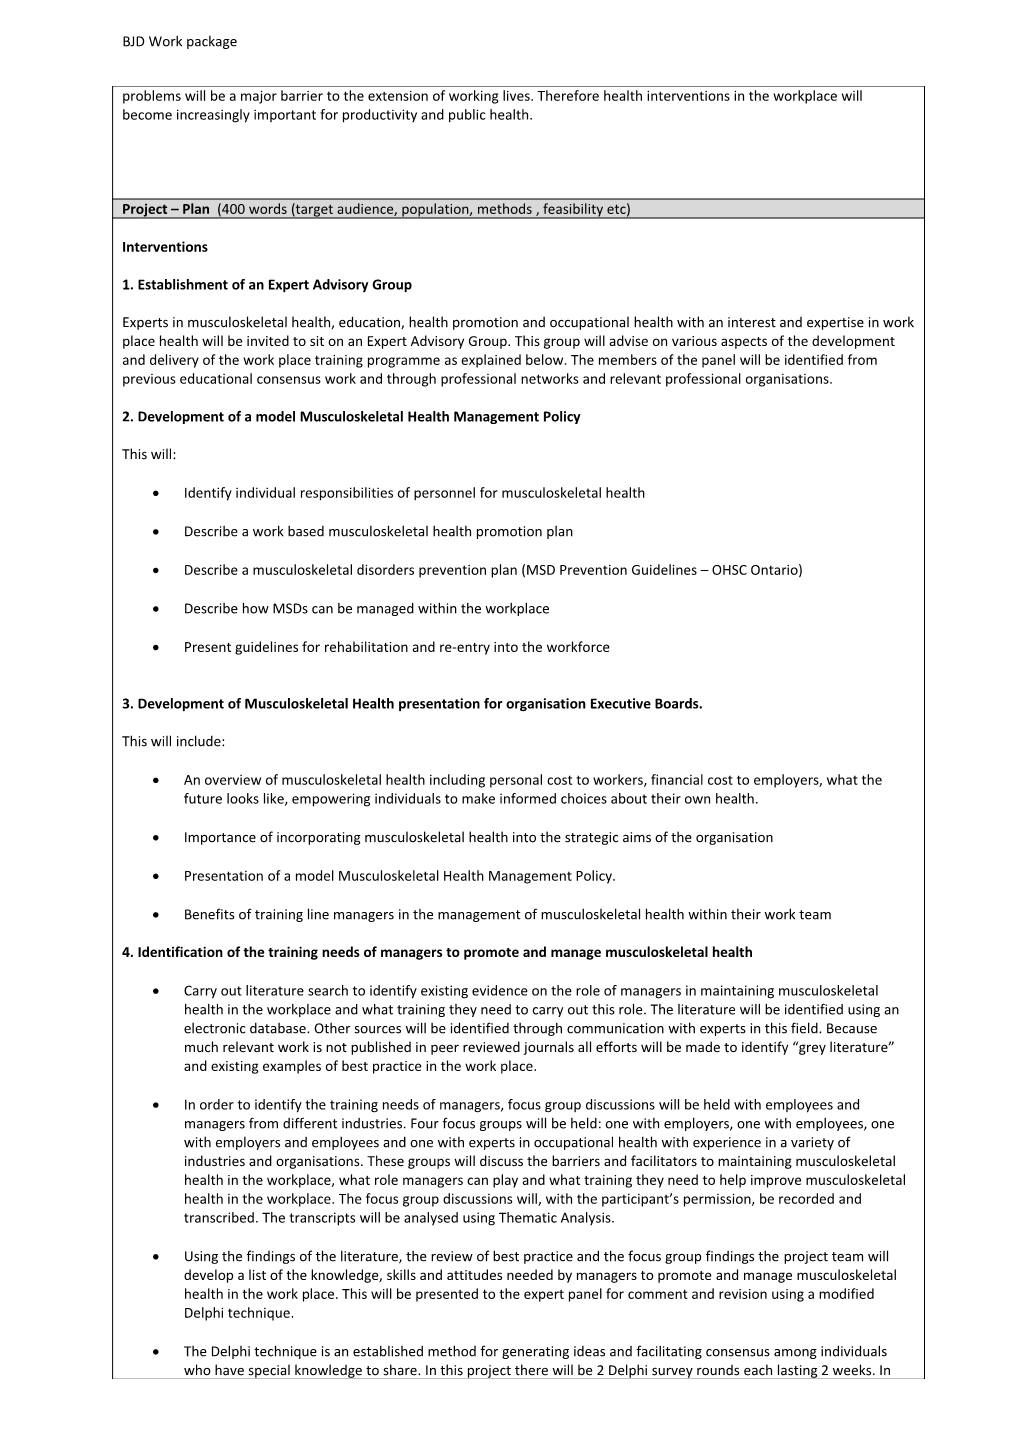 PROJECT DESCRIPTION (Max 1 Page, Full Details in Project Plan)